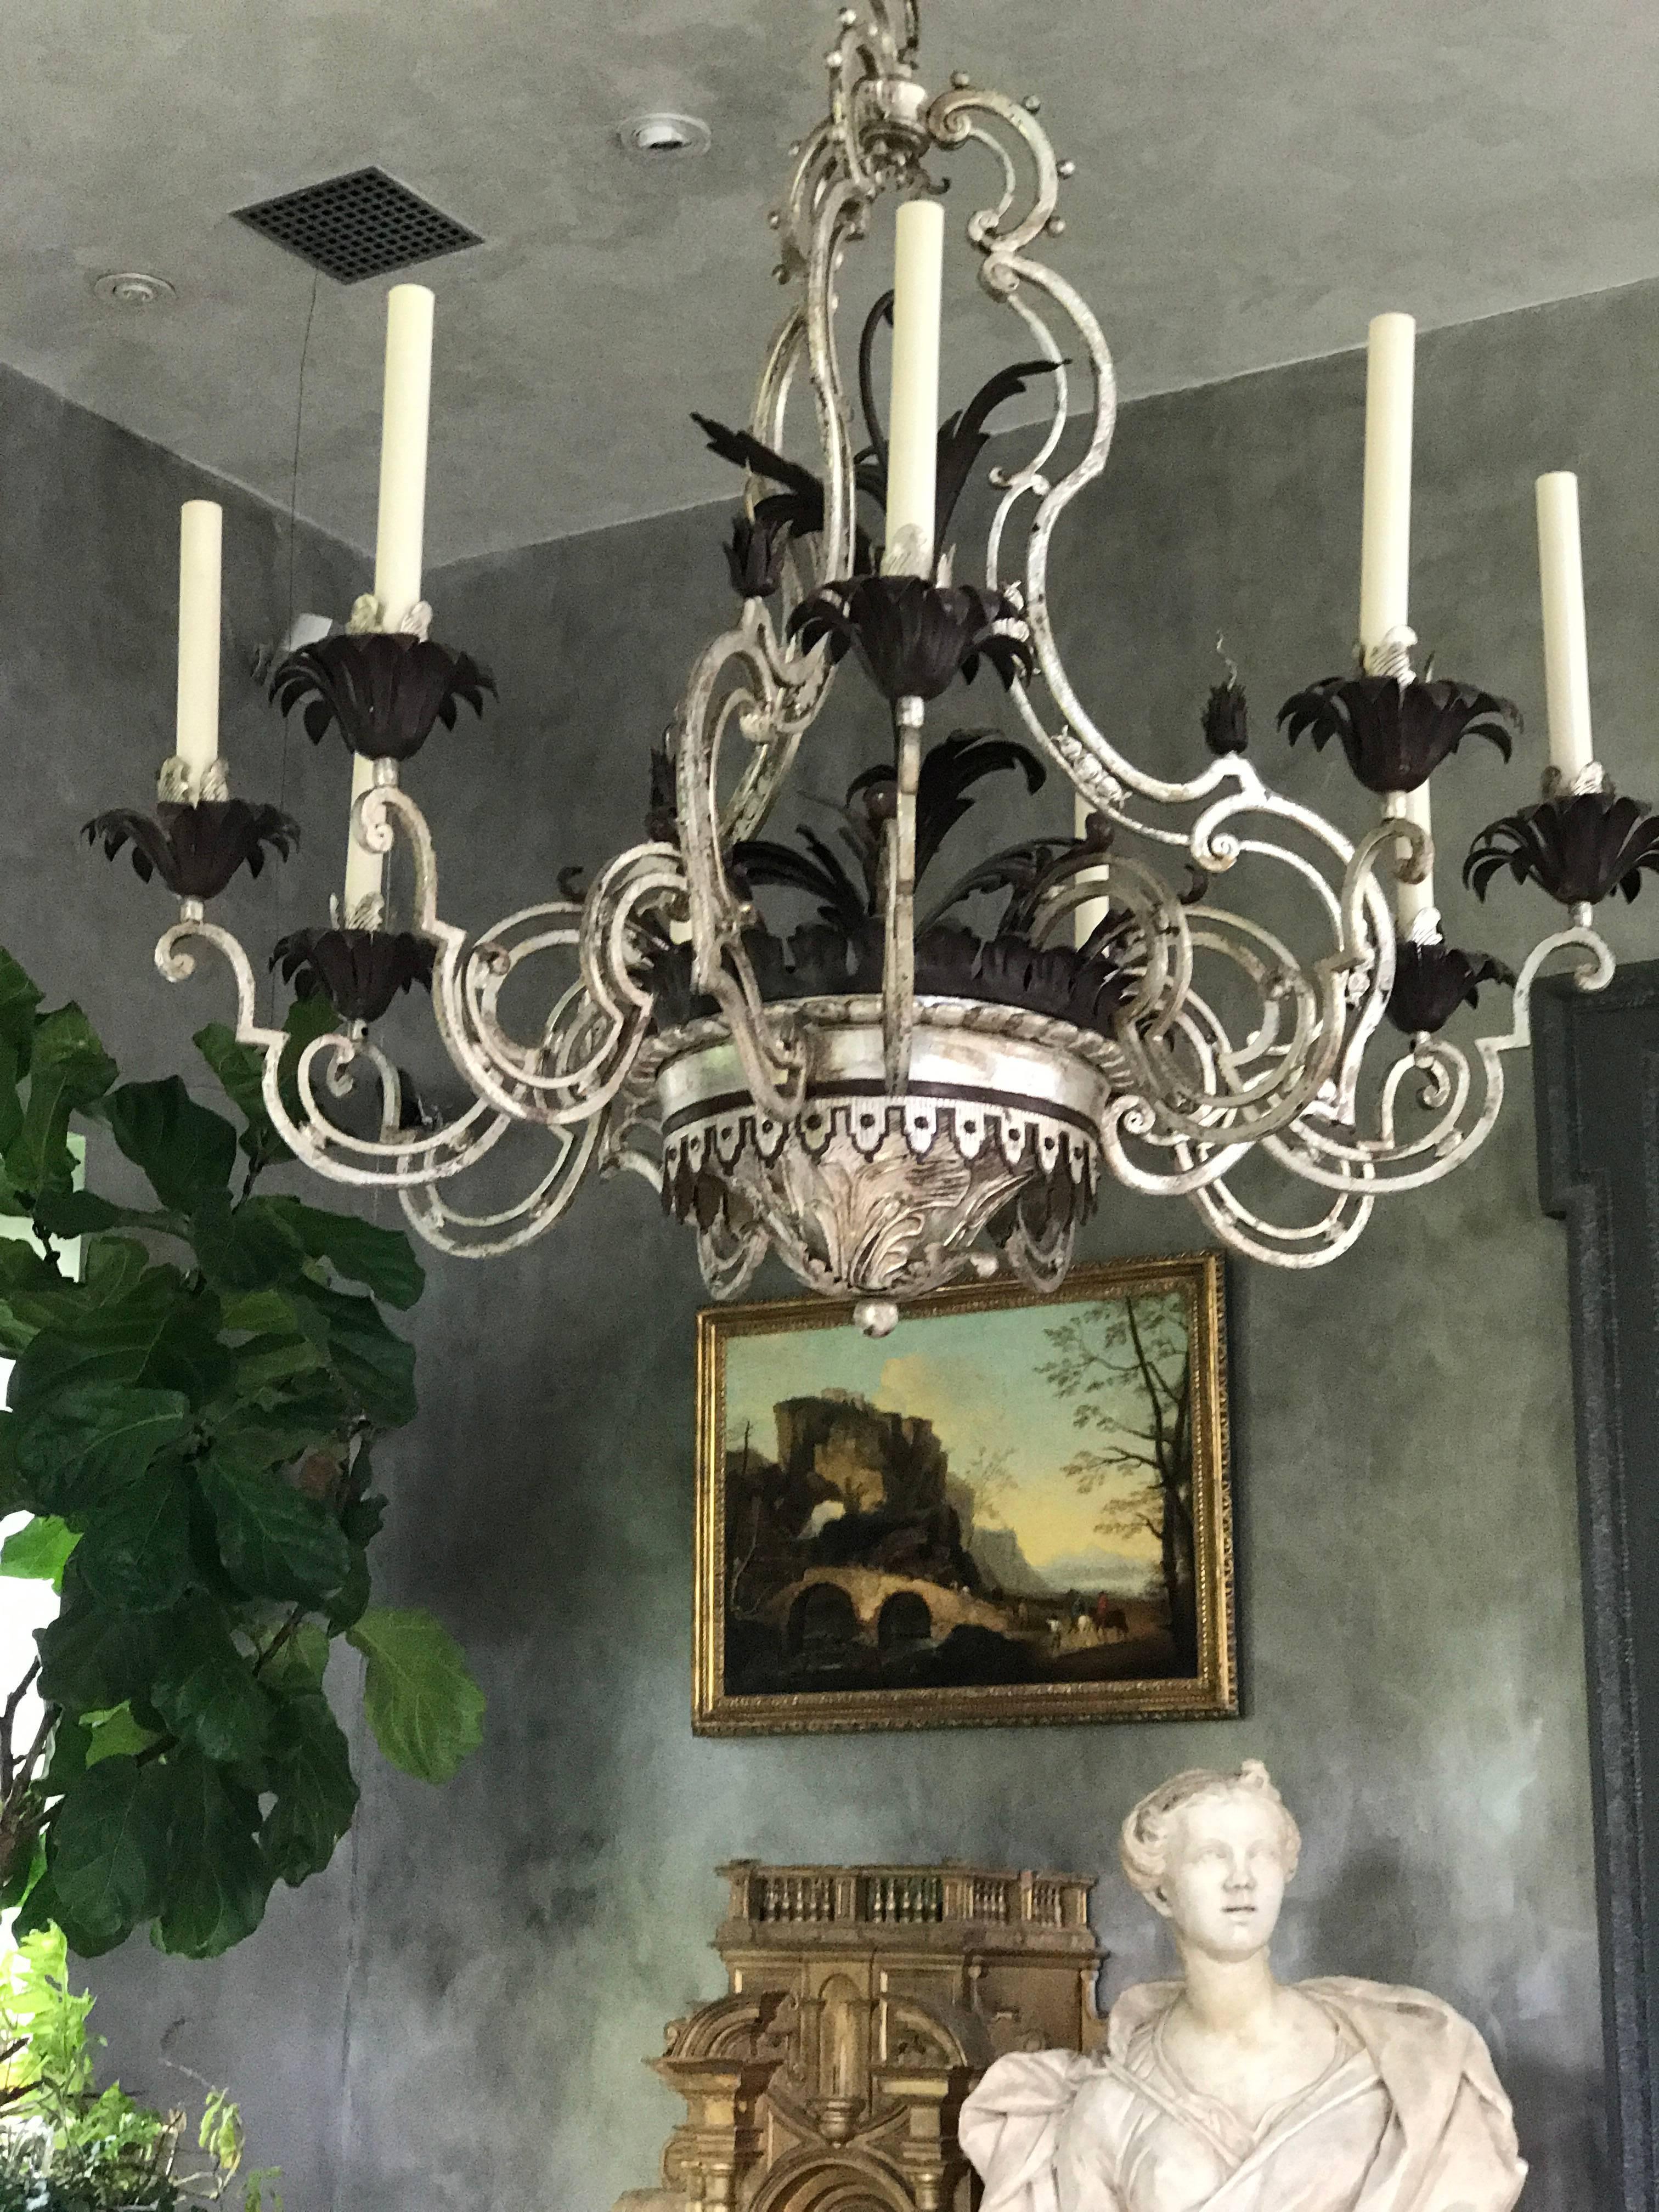 This beautiful wrought iron & tôle nine-arm chandelier was created in the 1940s and inspired by a Louis XV French Chandelier form. The aged silver patina gives this Chandelier it's extraordinary look.
